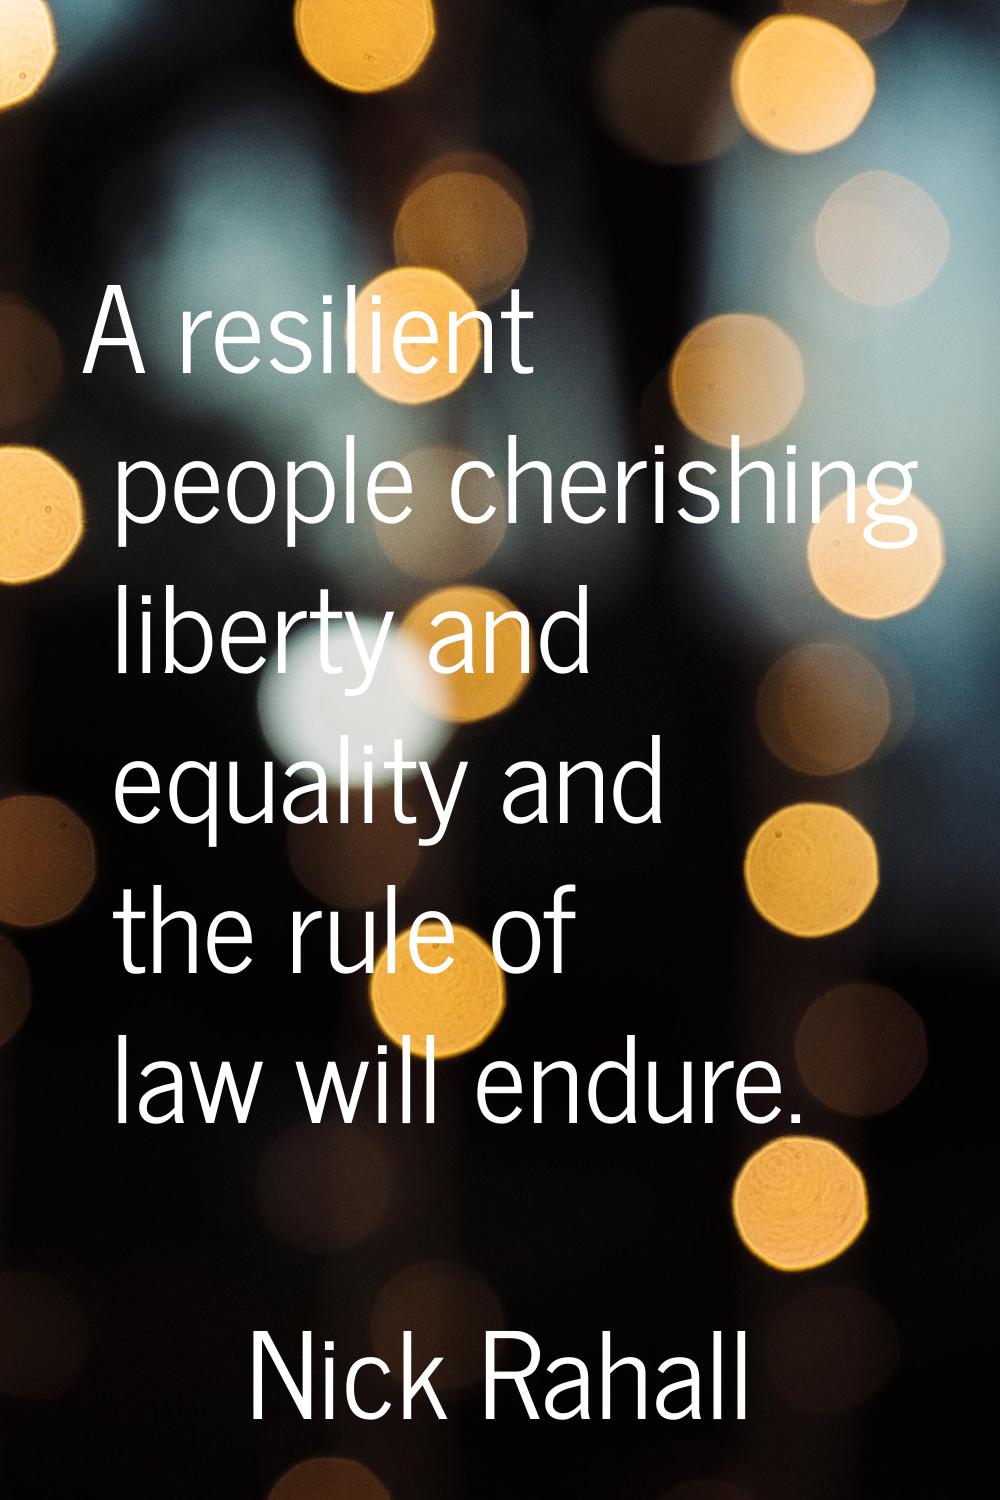 A resilient people cherishing liberty and equality and the rule of law will endure.